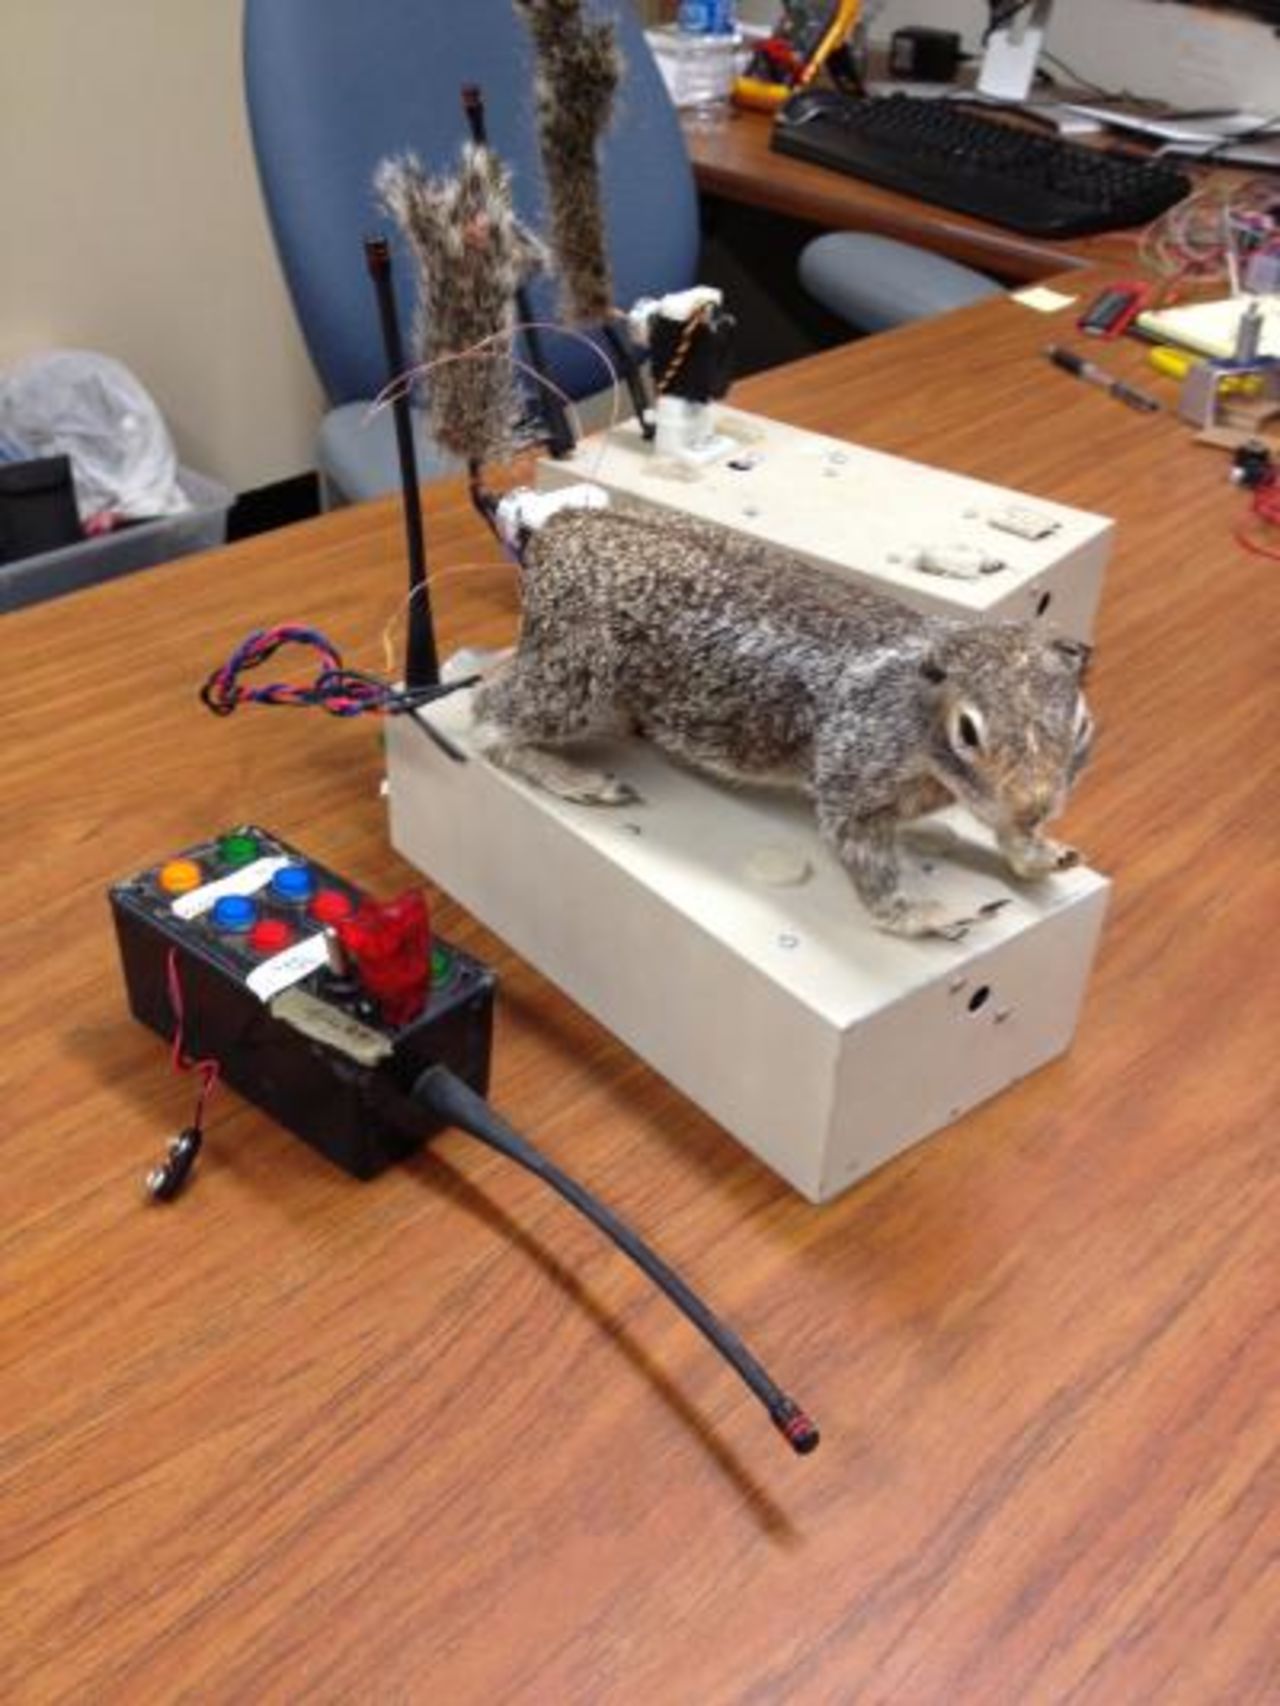 Scientists have created "robosquirrel" in a bid to better understand the interaction between real squirrels and their main predator, rattlesnakes. 